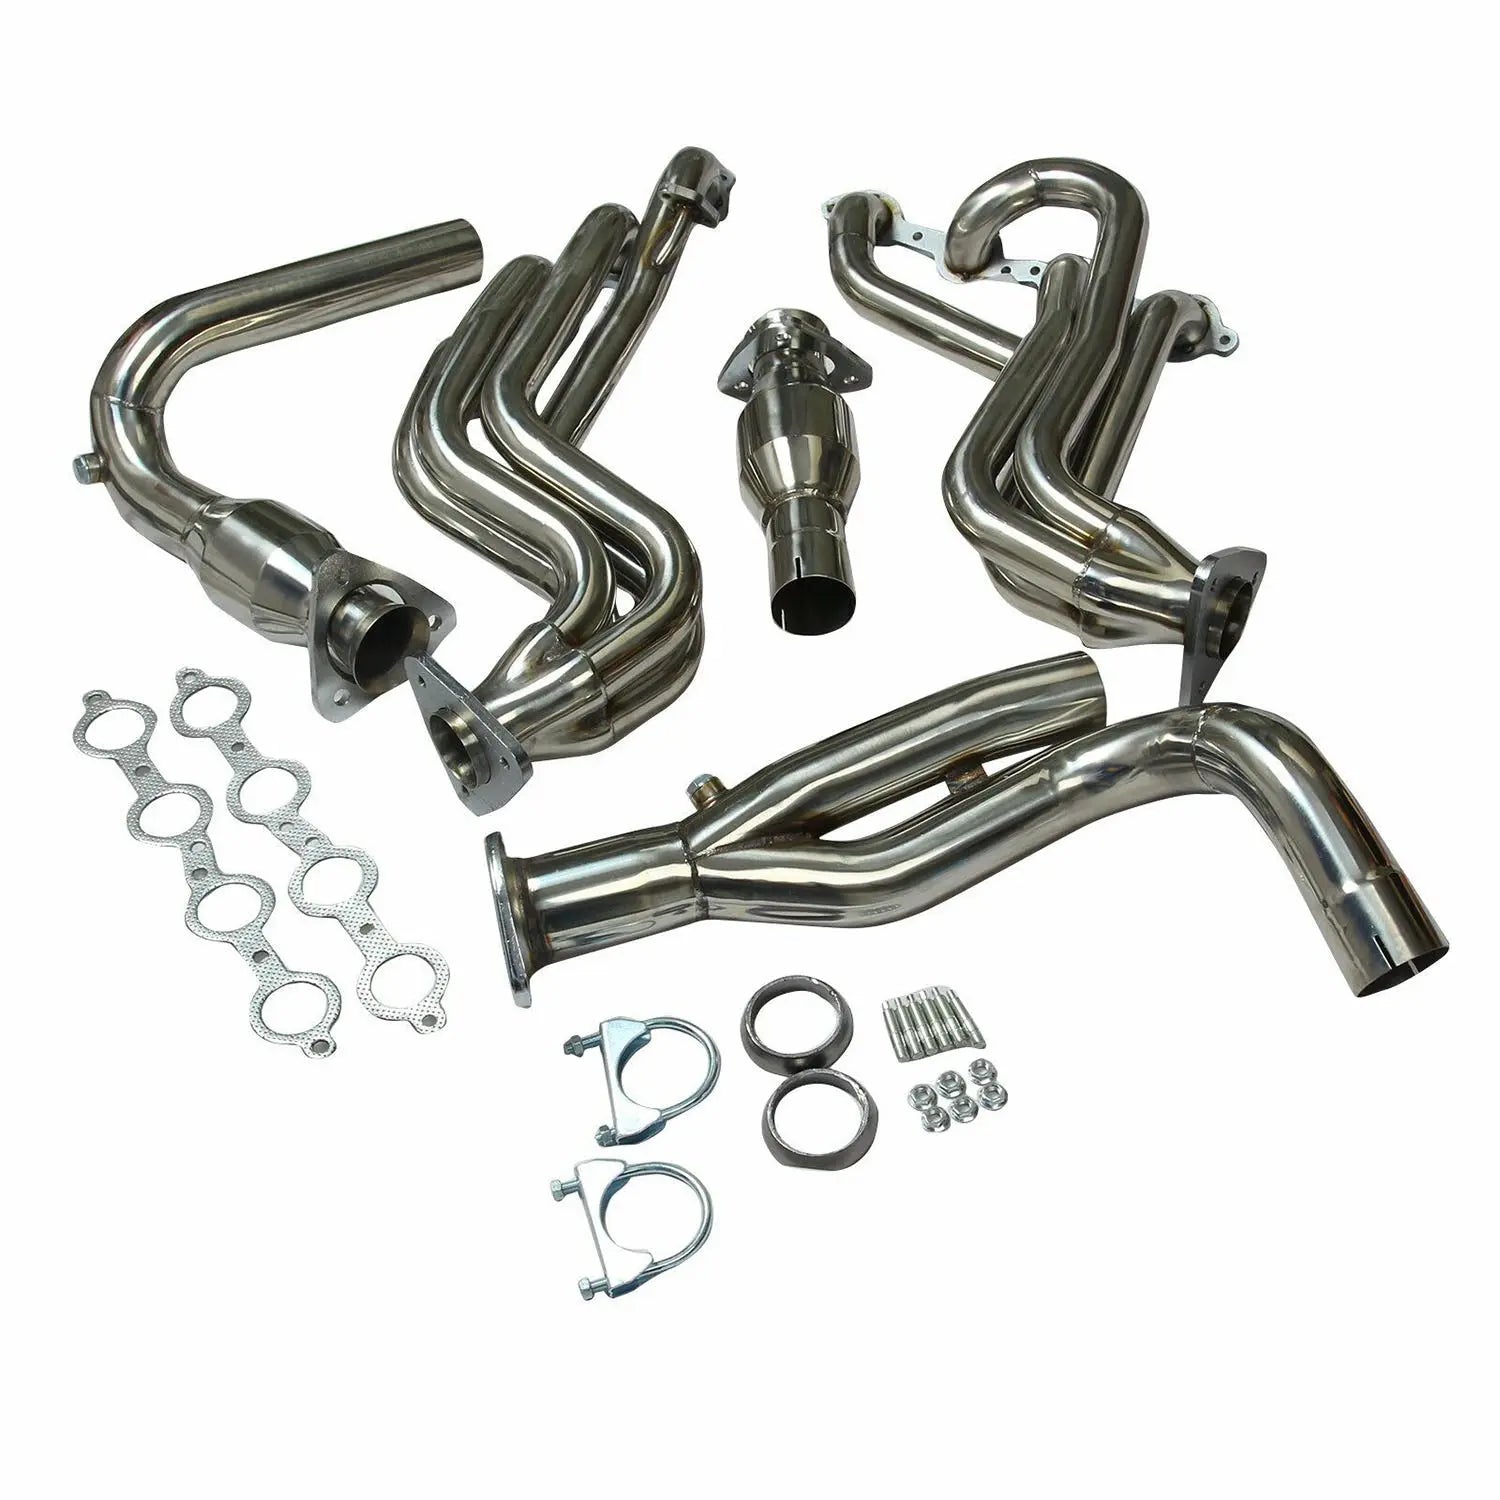 Exhaust Header for 1999-2006 GMC/Chevy GMT800 V8 Engine Stainless Manifold Flashark